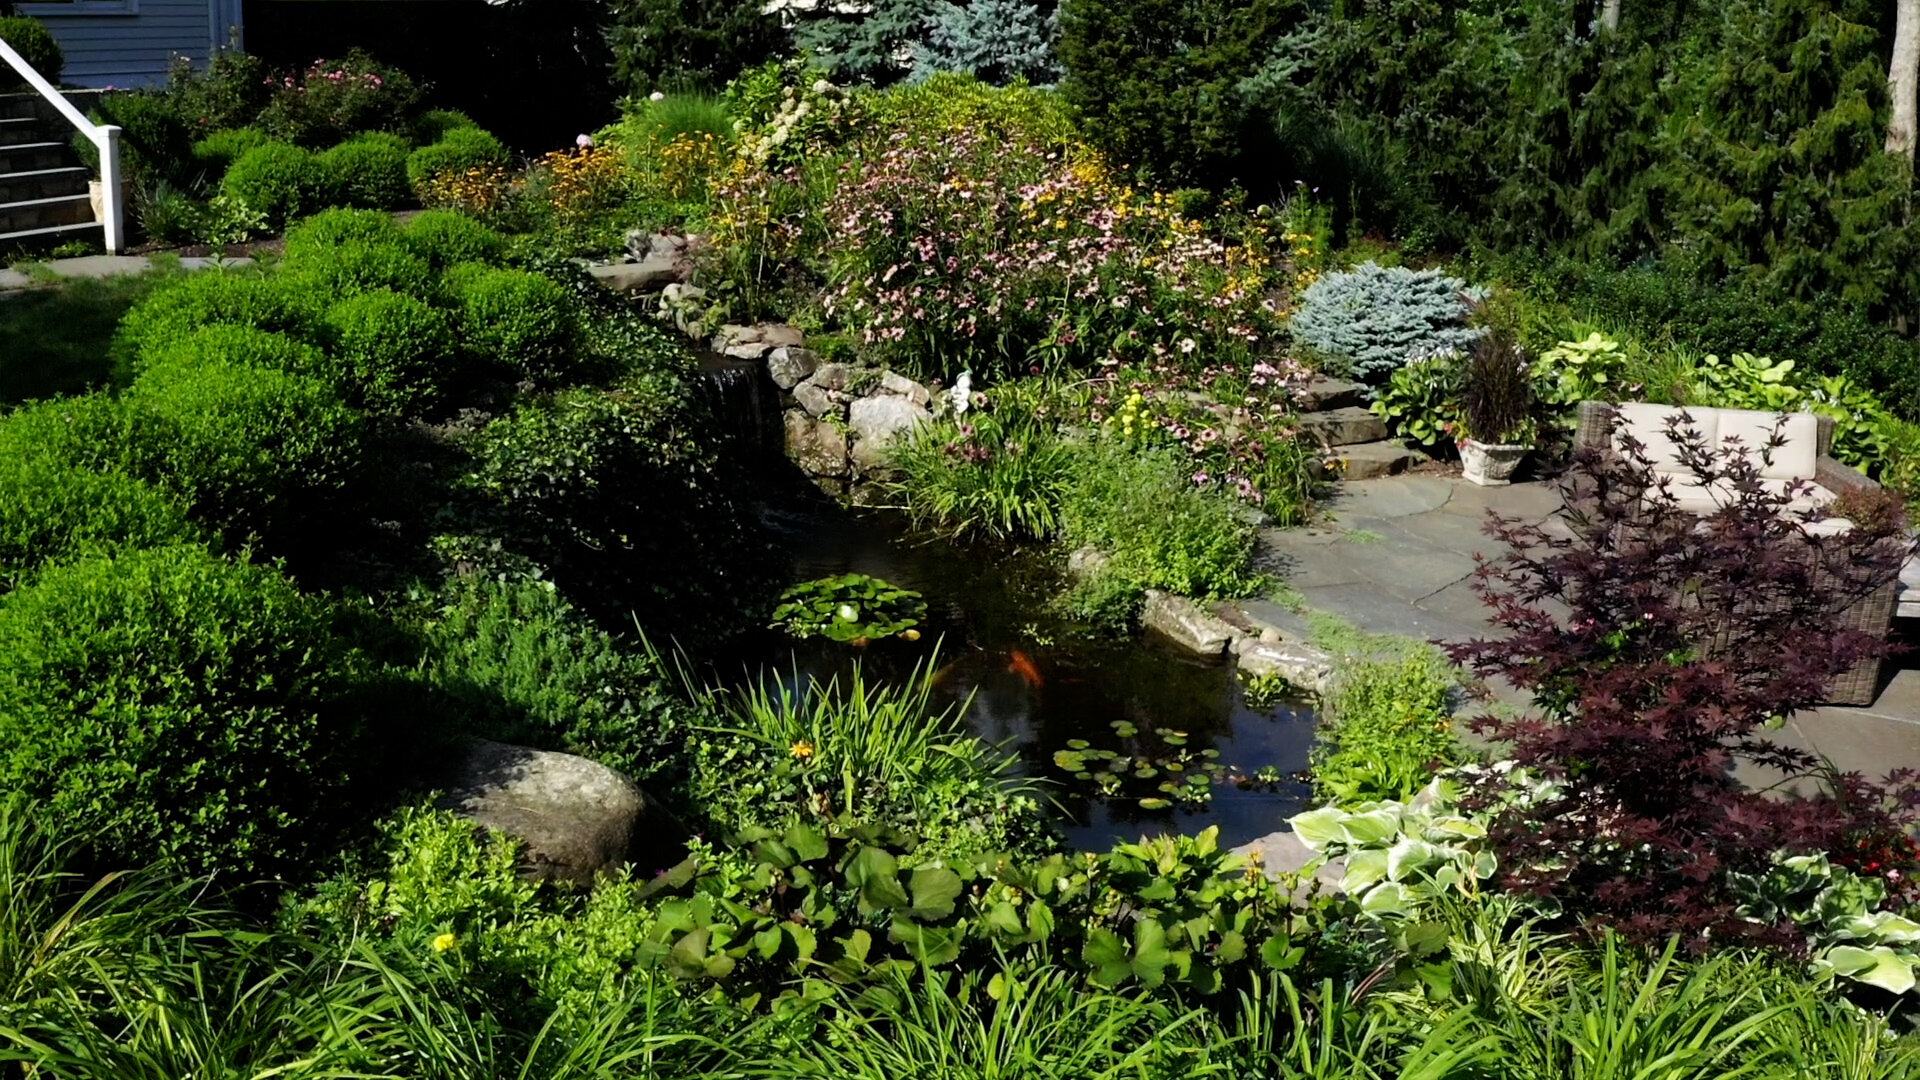 Landscaping services in Wyckoff, NJ